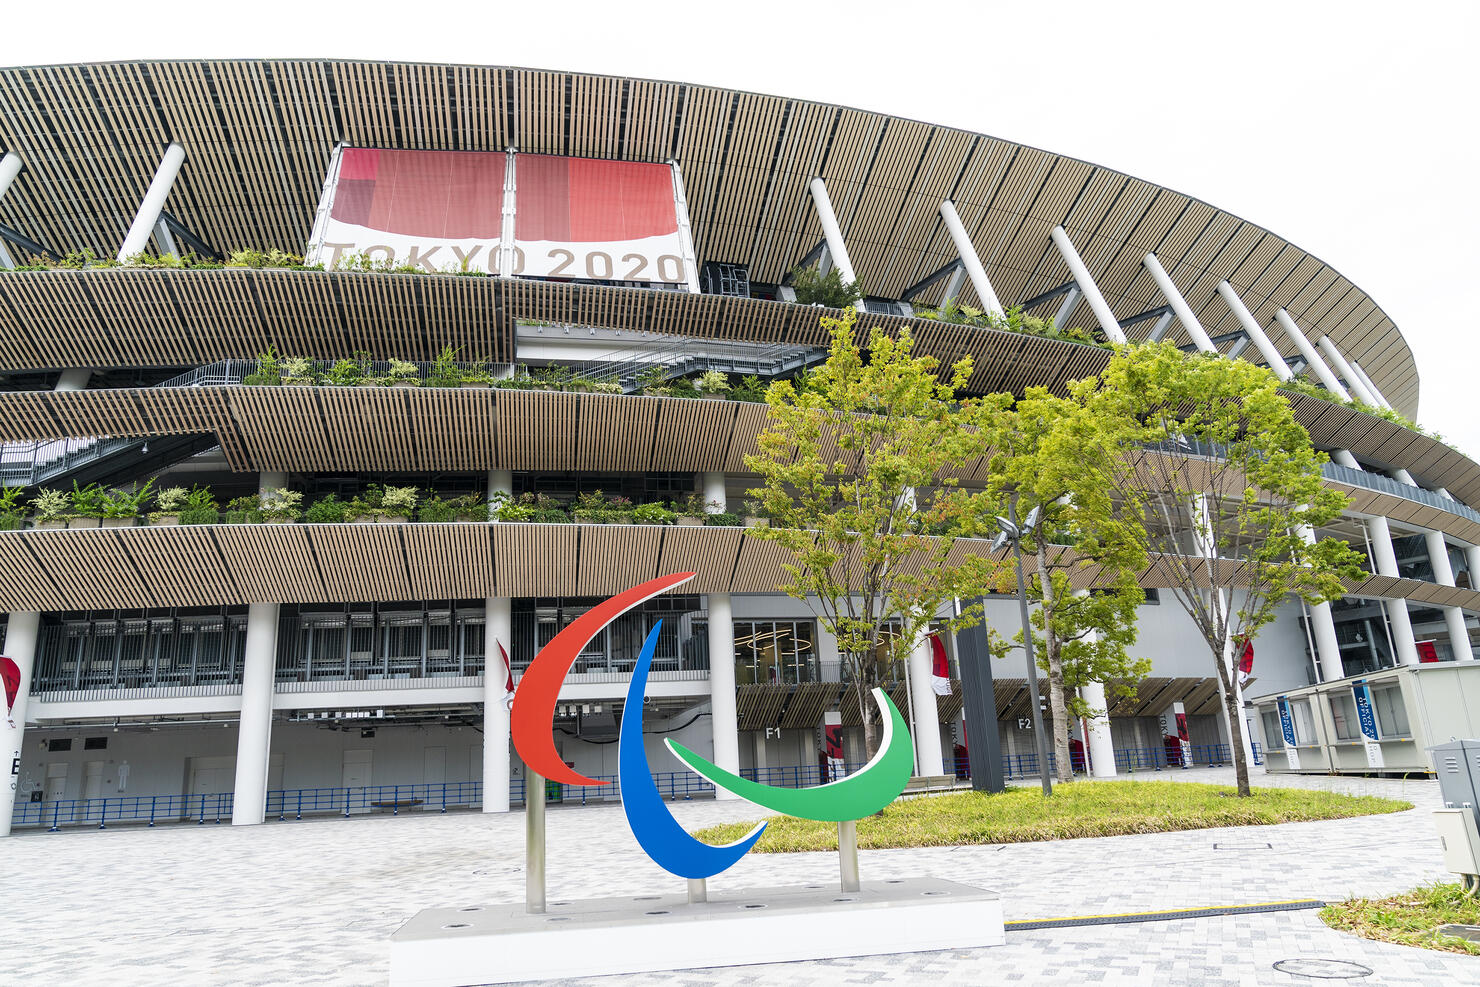 Exterior  view of Olympic stadium with sculpture of logo of